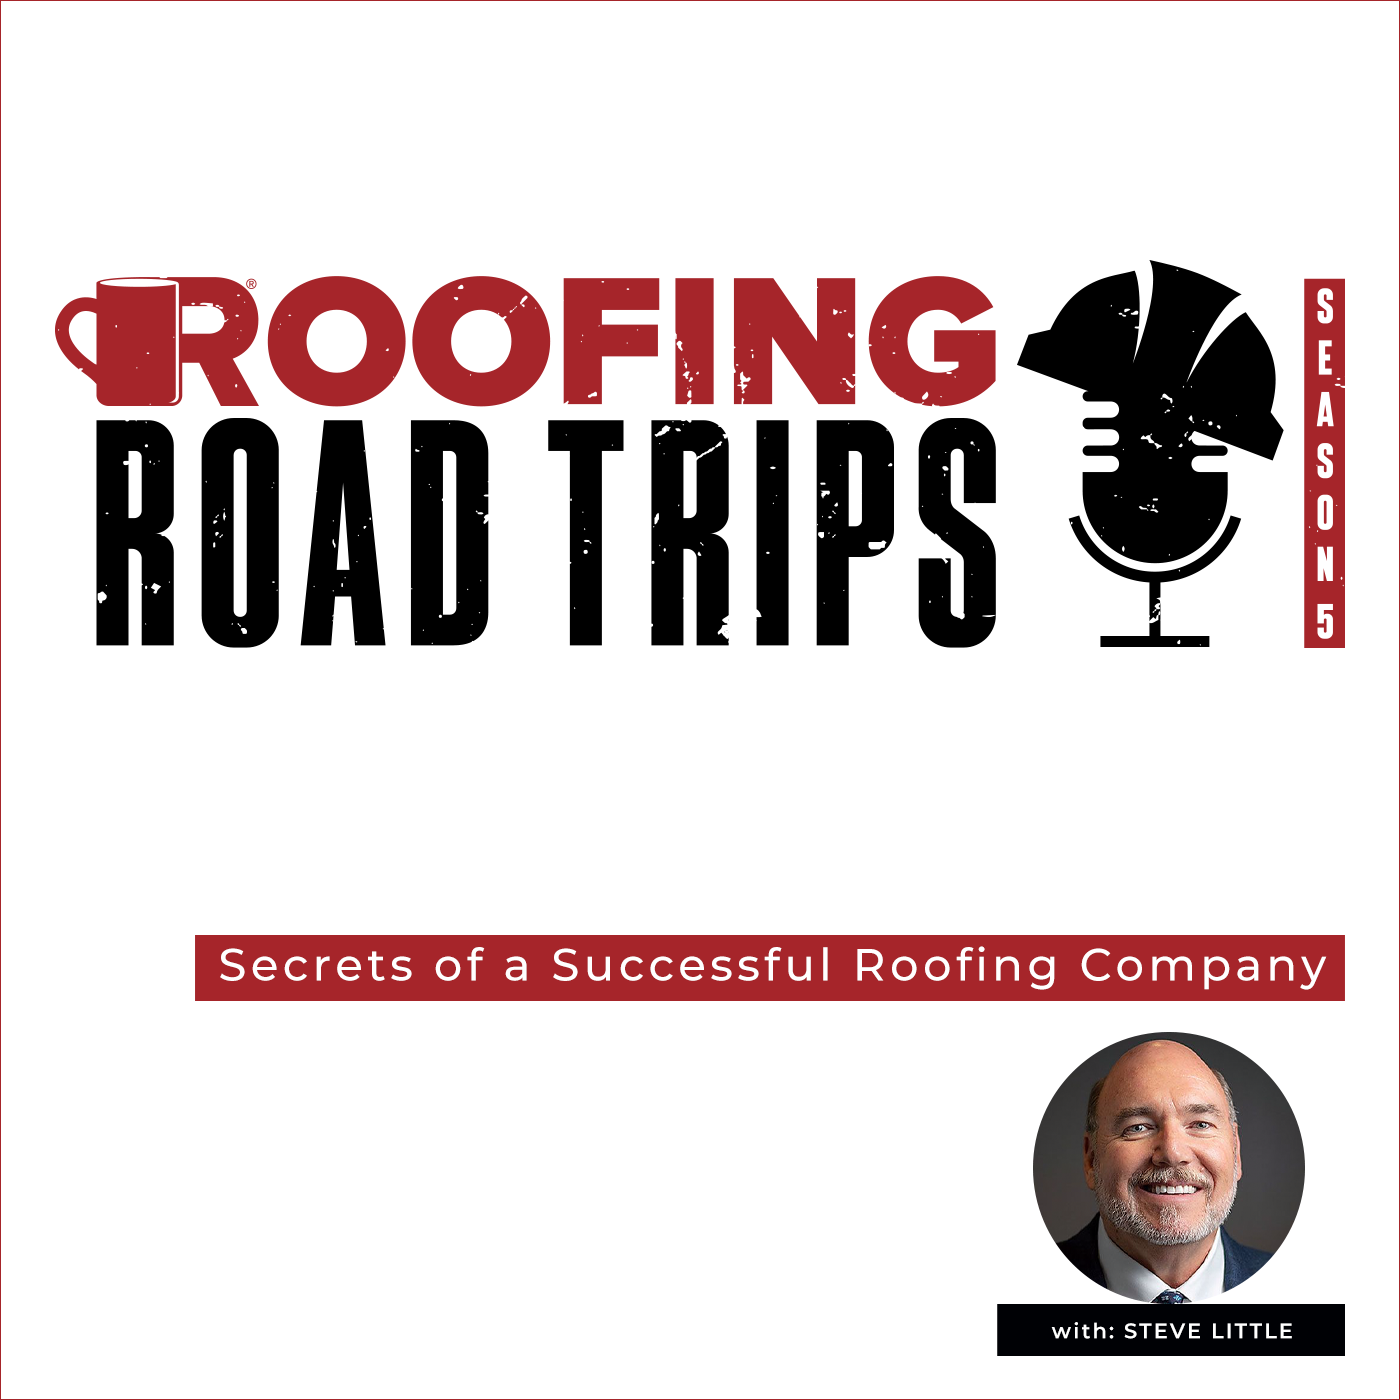 Steve Little - Secrets of a Successful Roofing Company